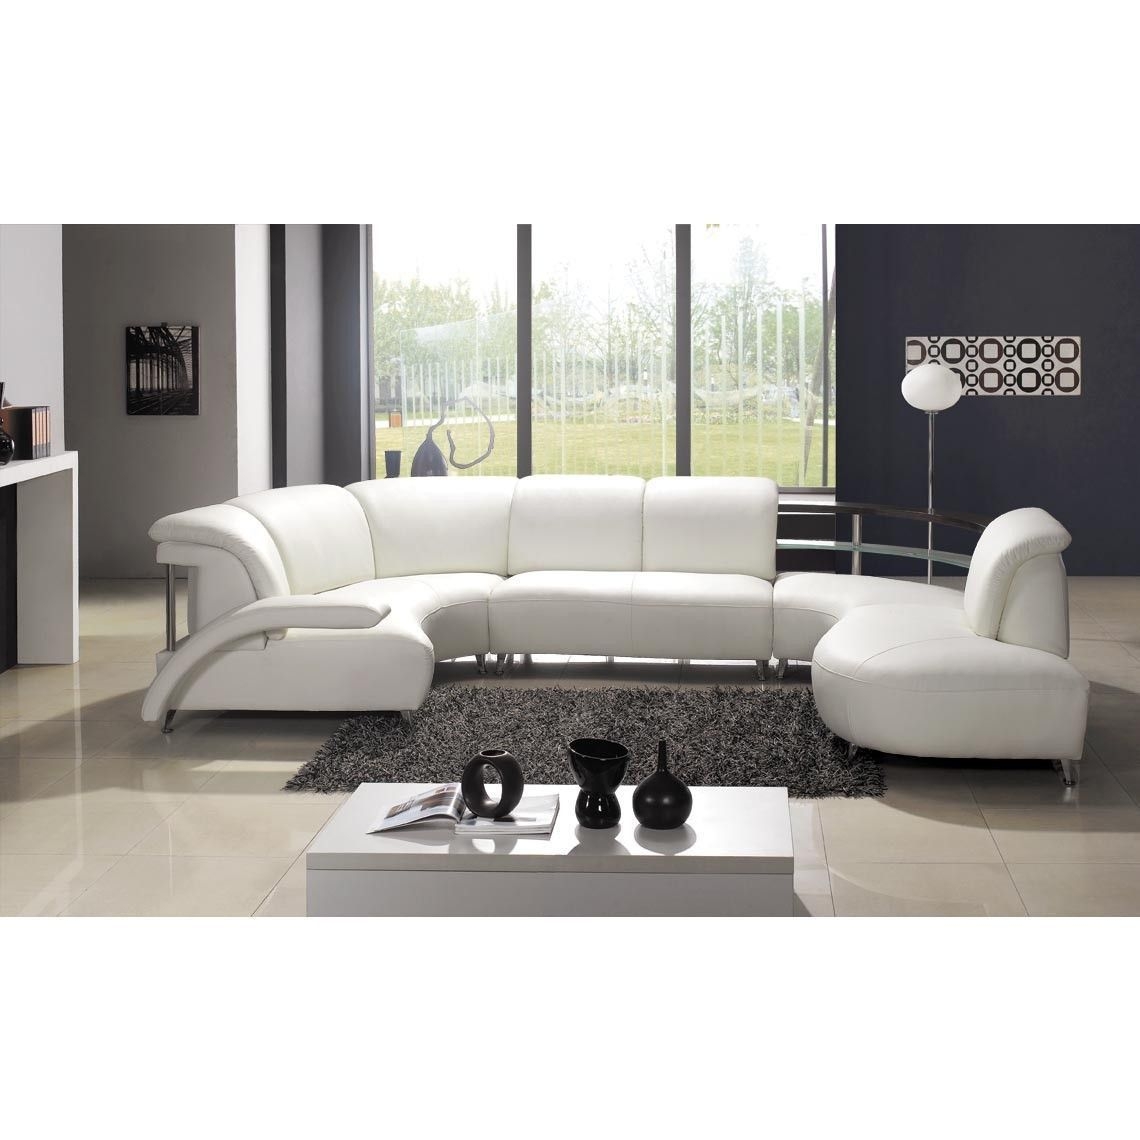 Small white leather sectional 1